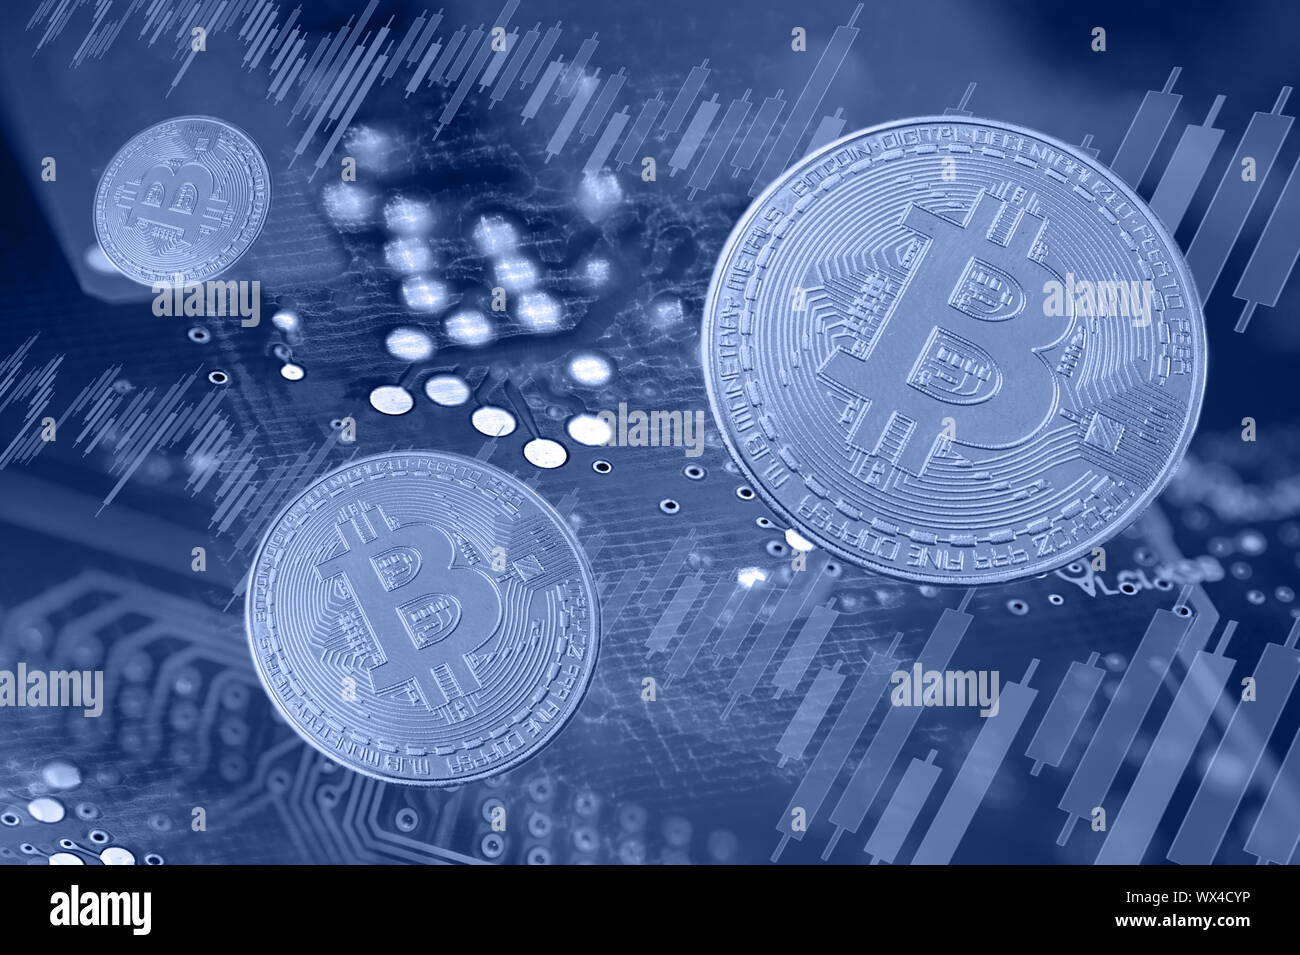 Economy trends virtual digital currency abstract background. Stock Photo